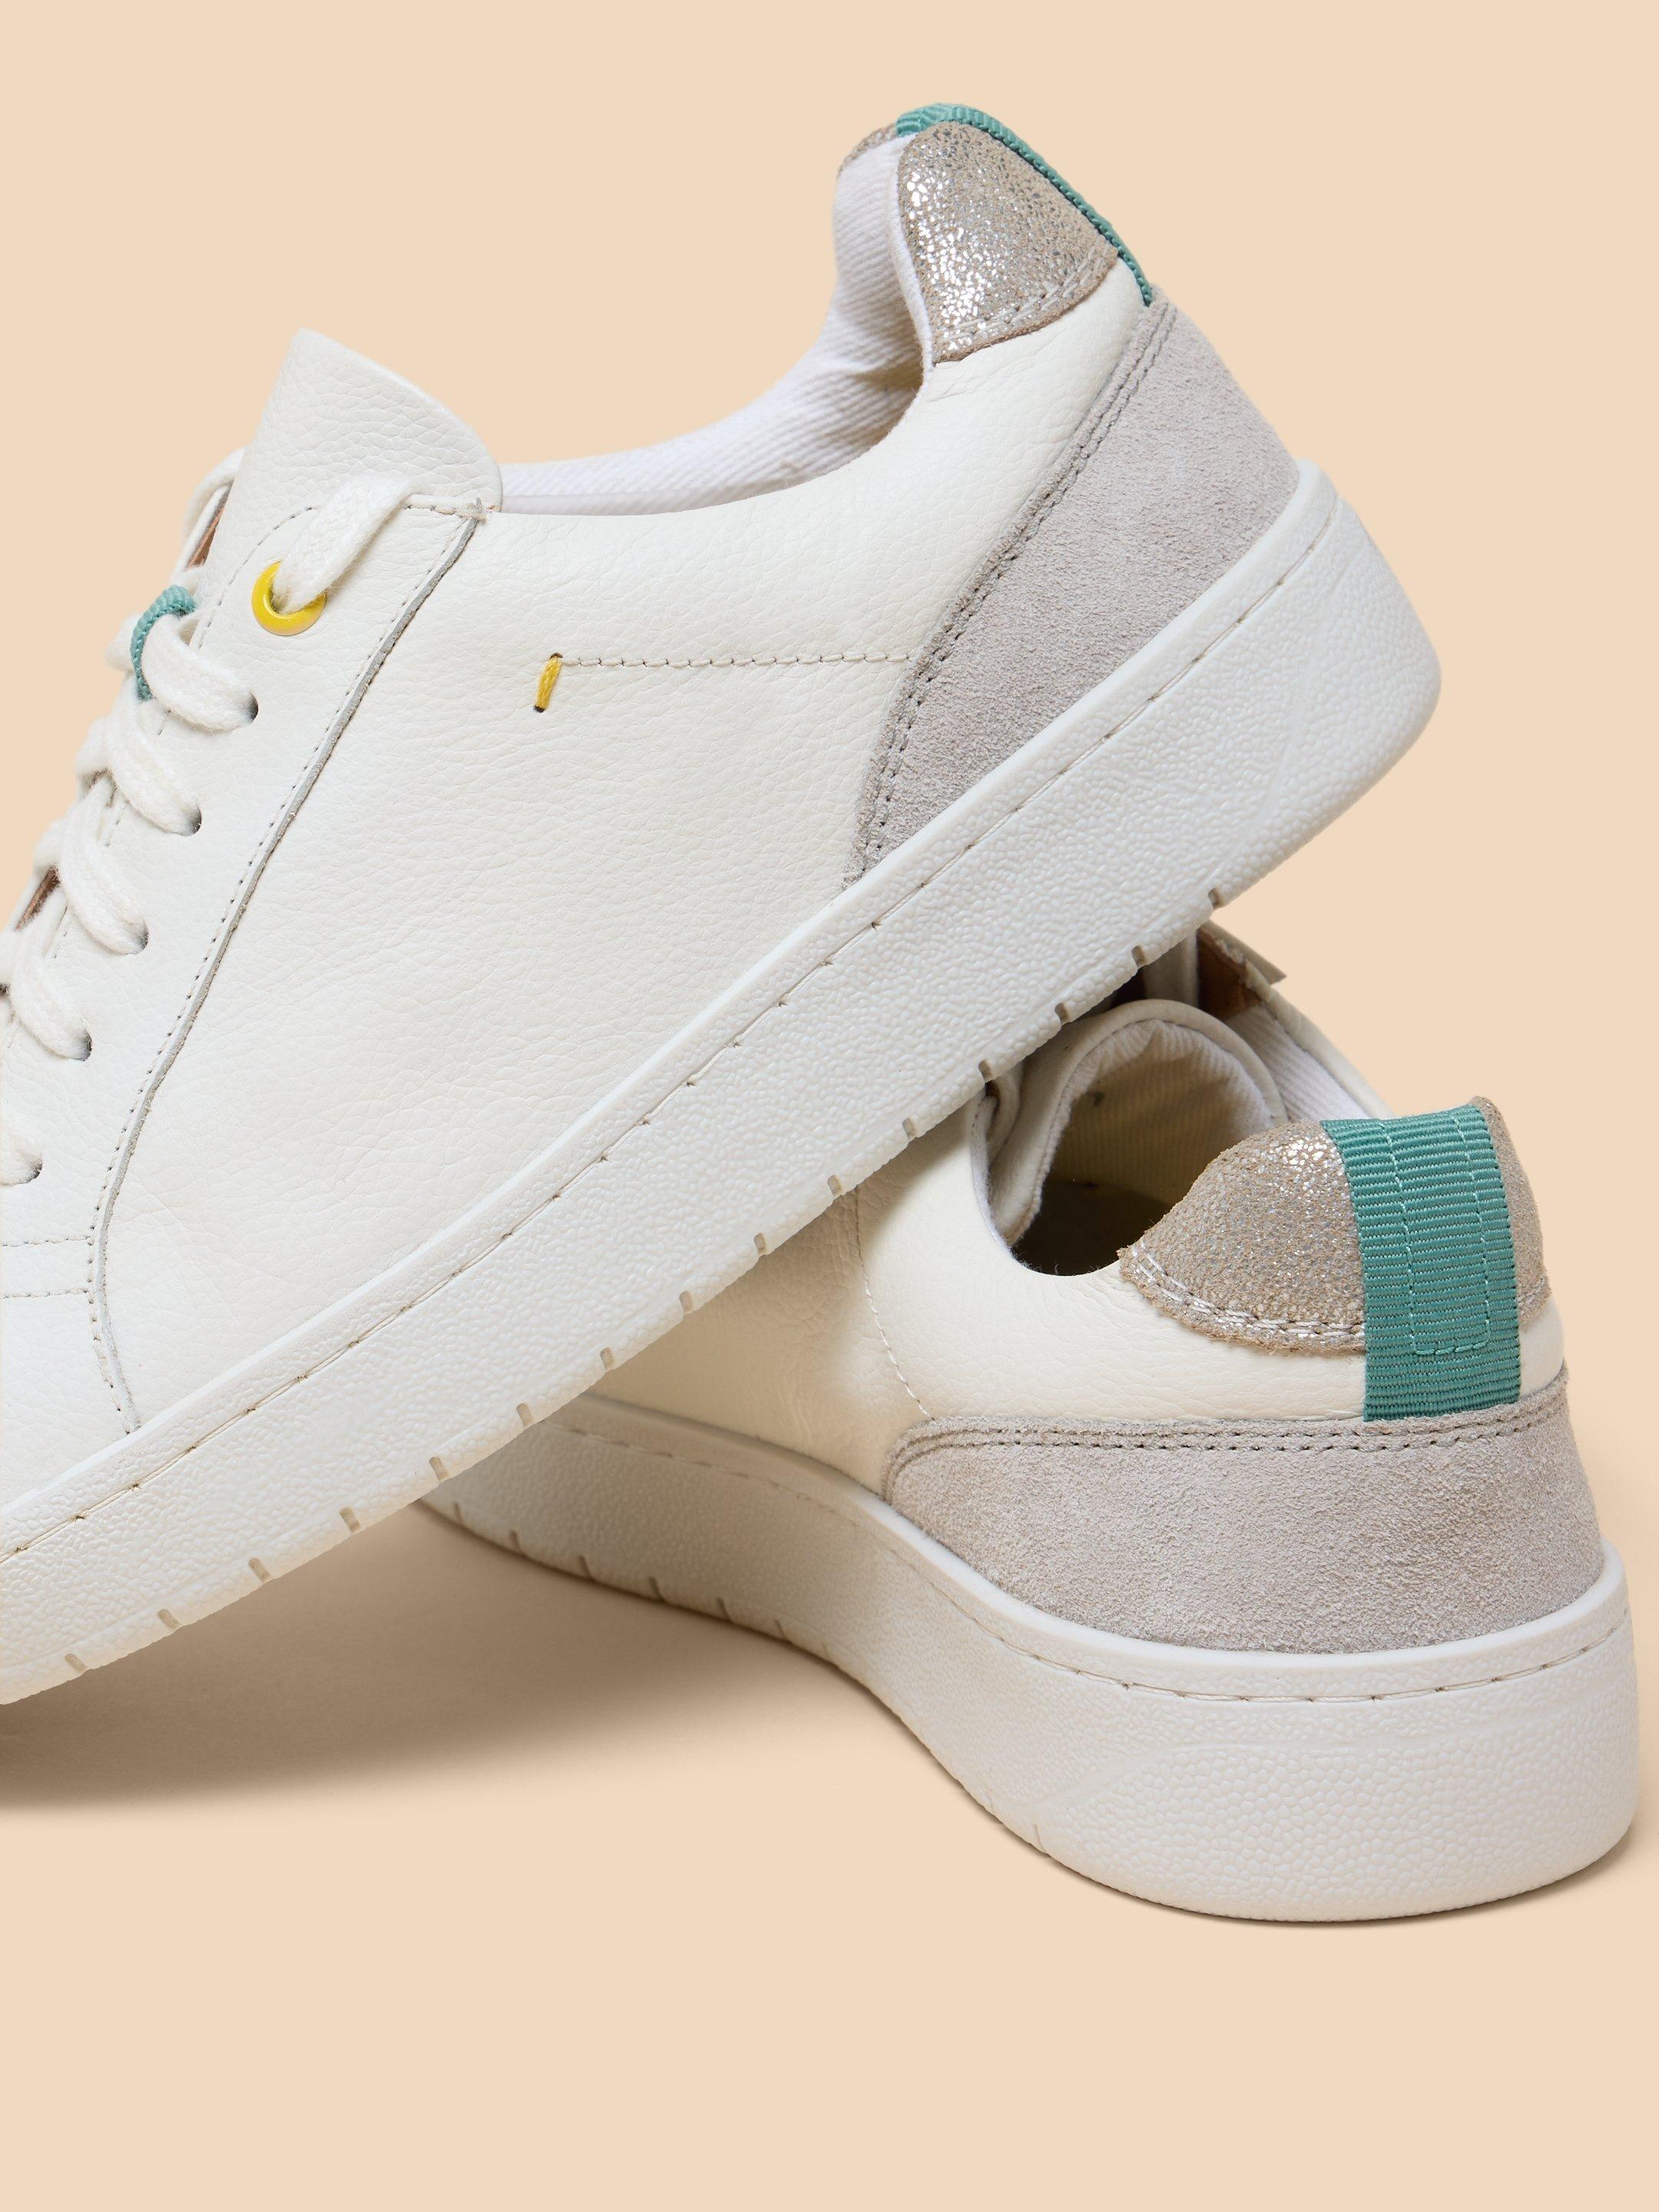 Lily Leather Suede Trainer in WHITE MLT - FLAT DETAIL